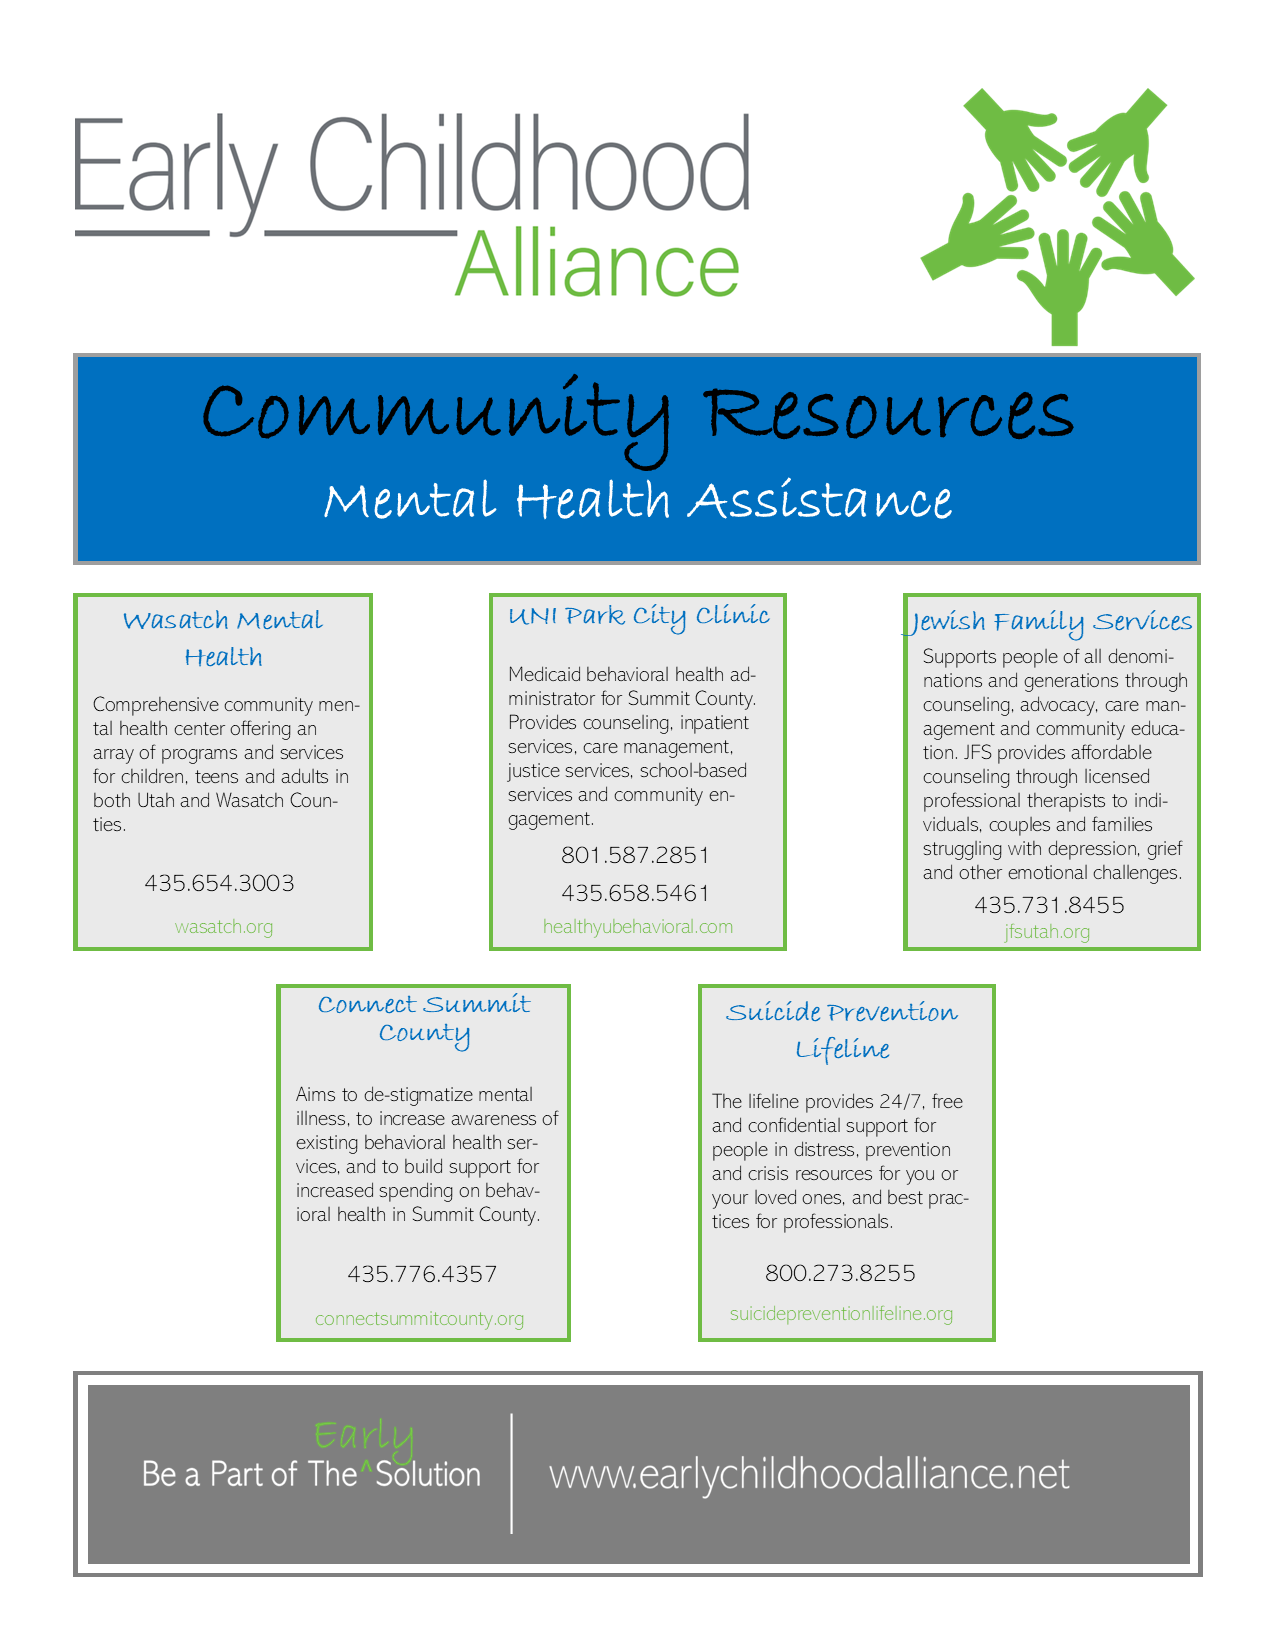 Mental Health Assistance Community Resources